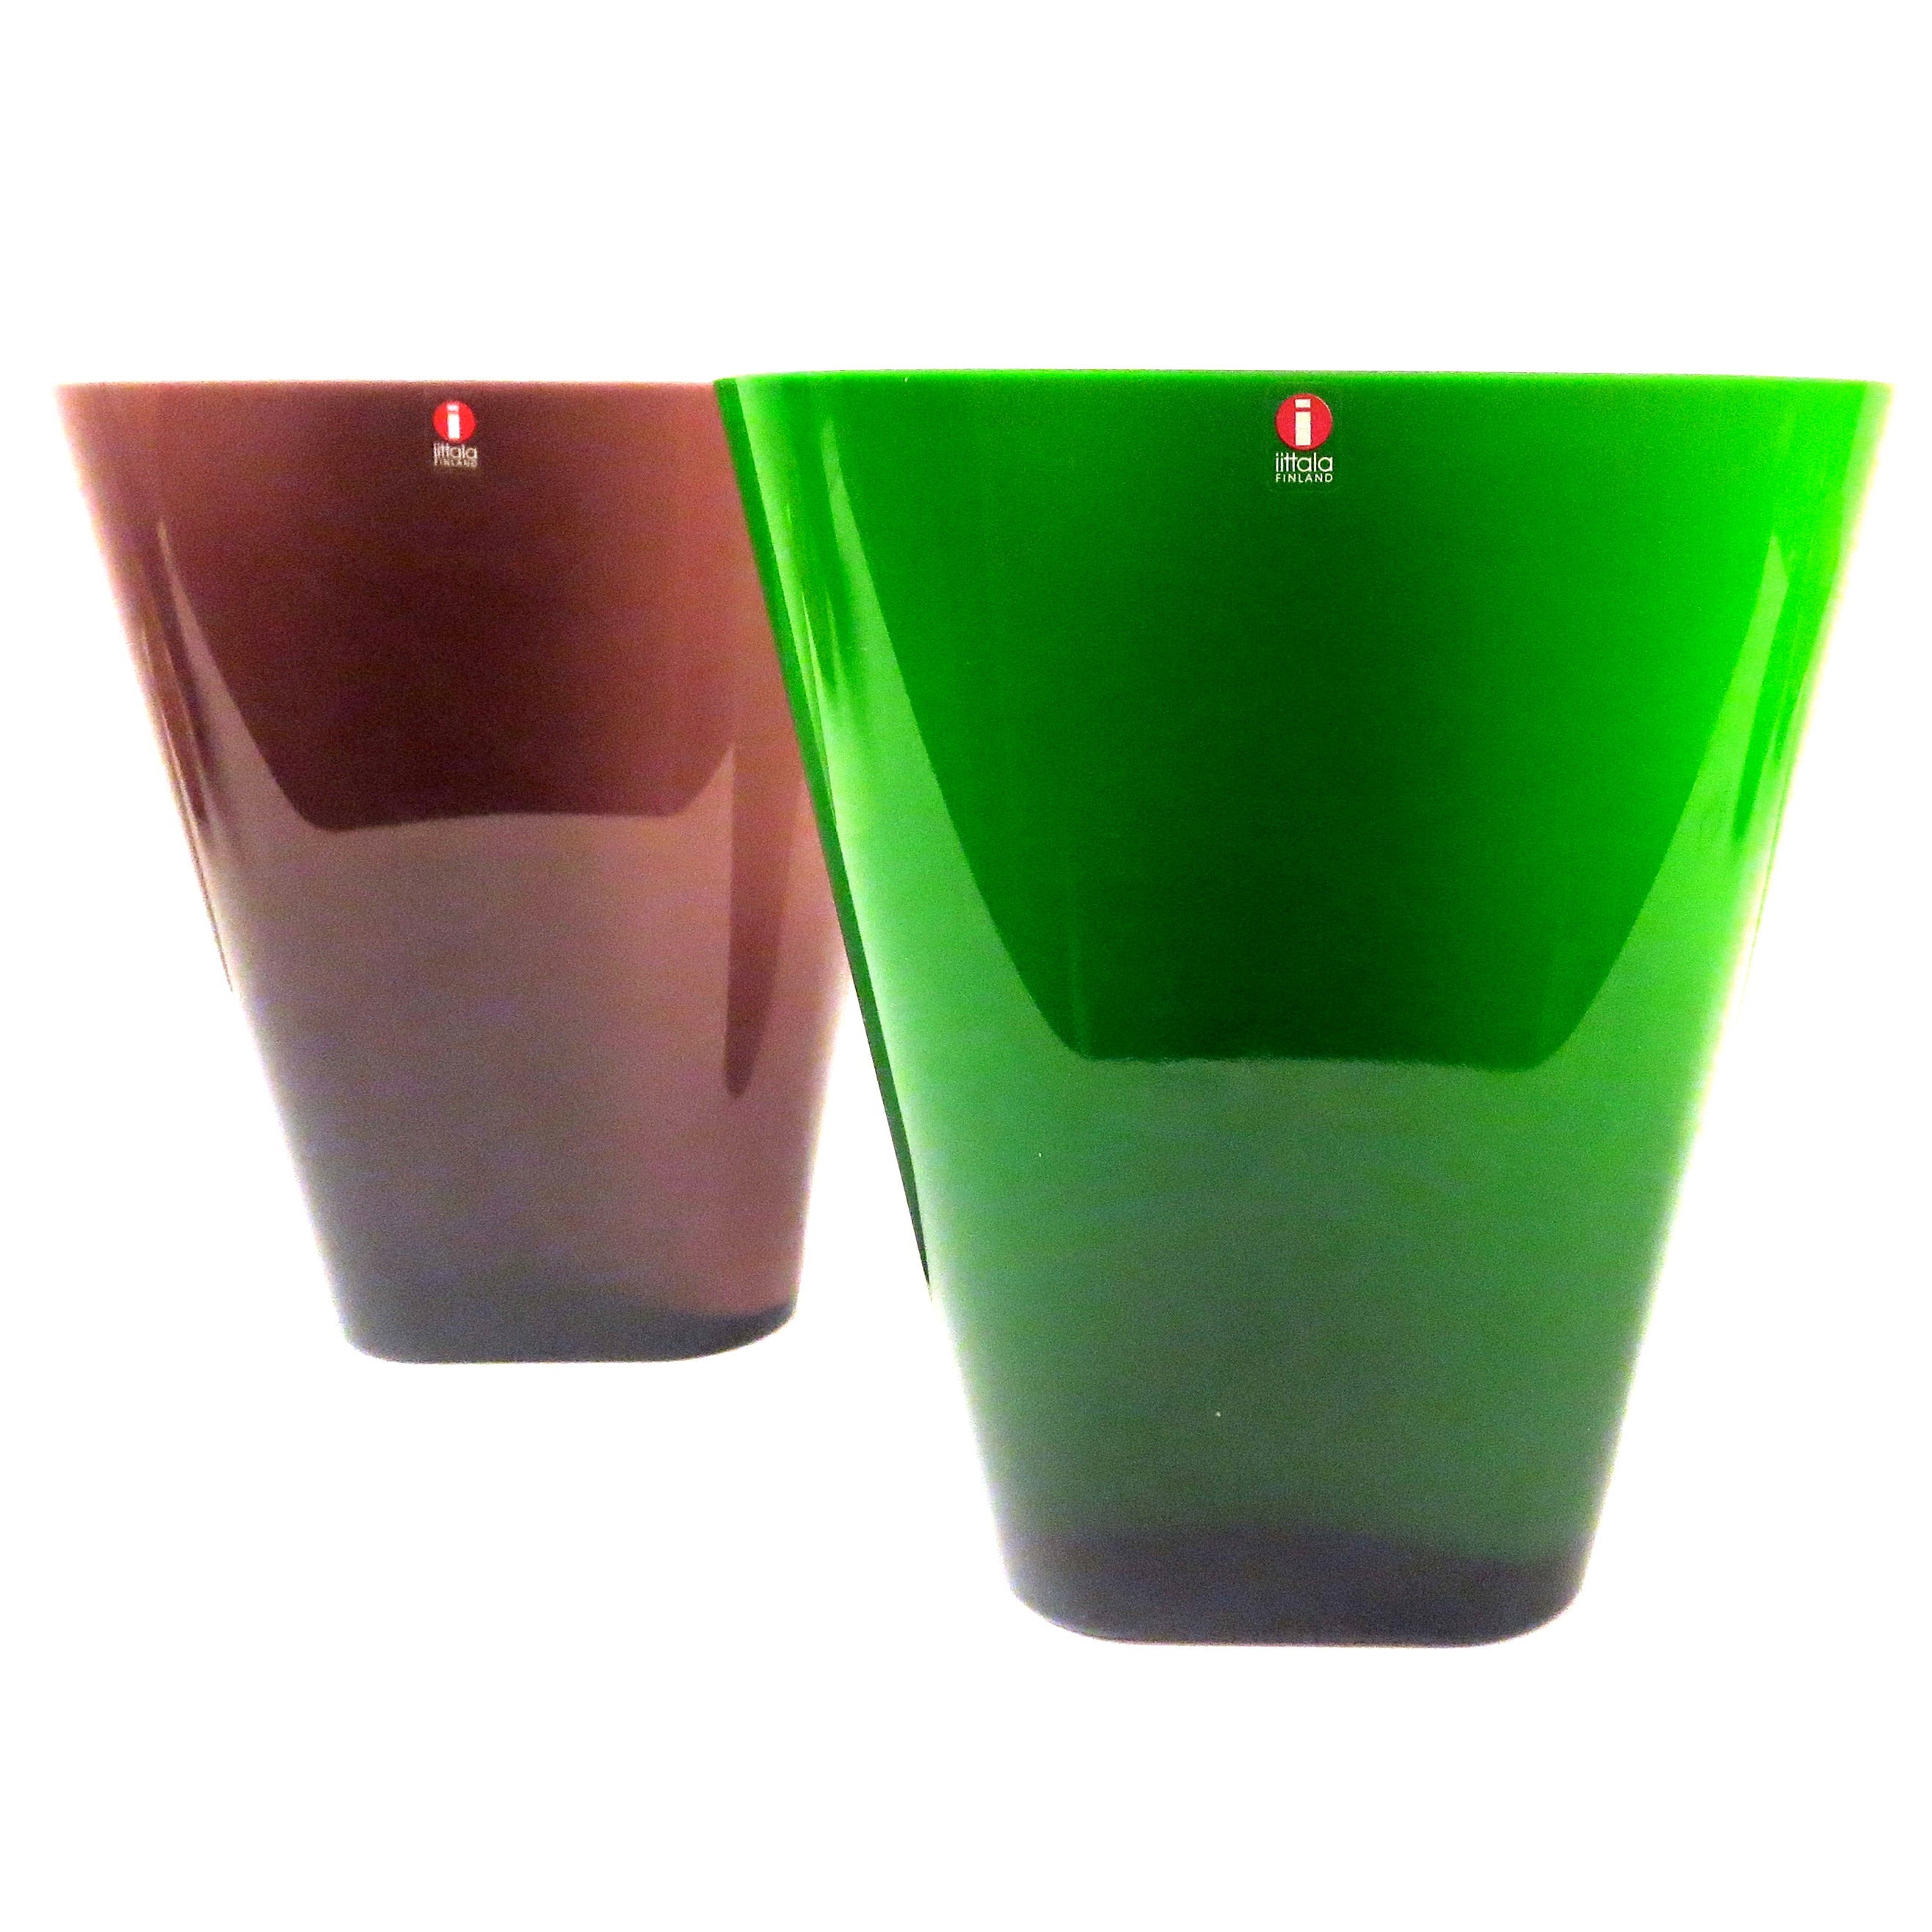 Danish Modern pair of glass vases Made in Finland by IIttala